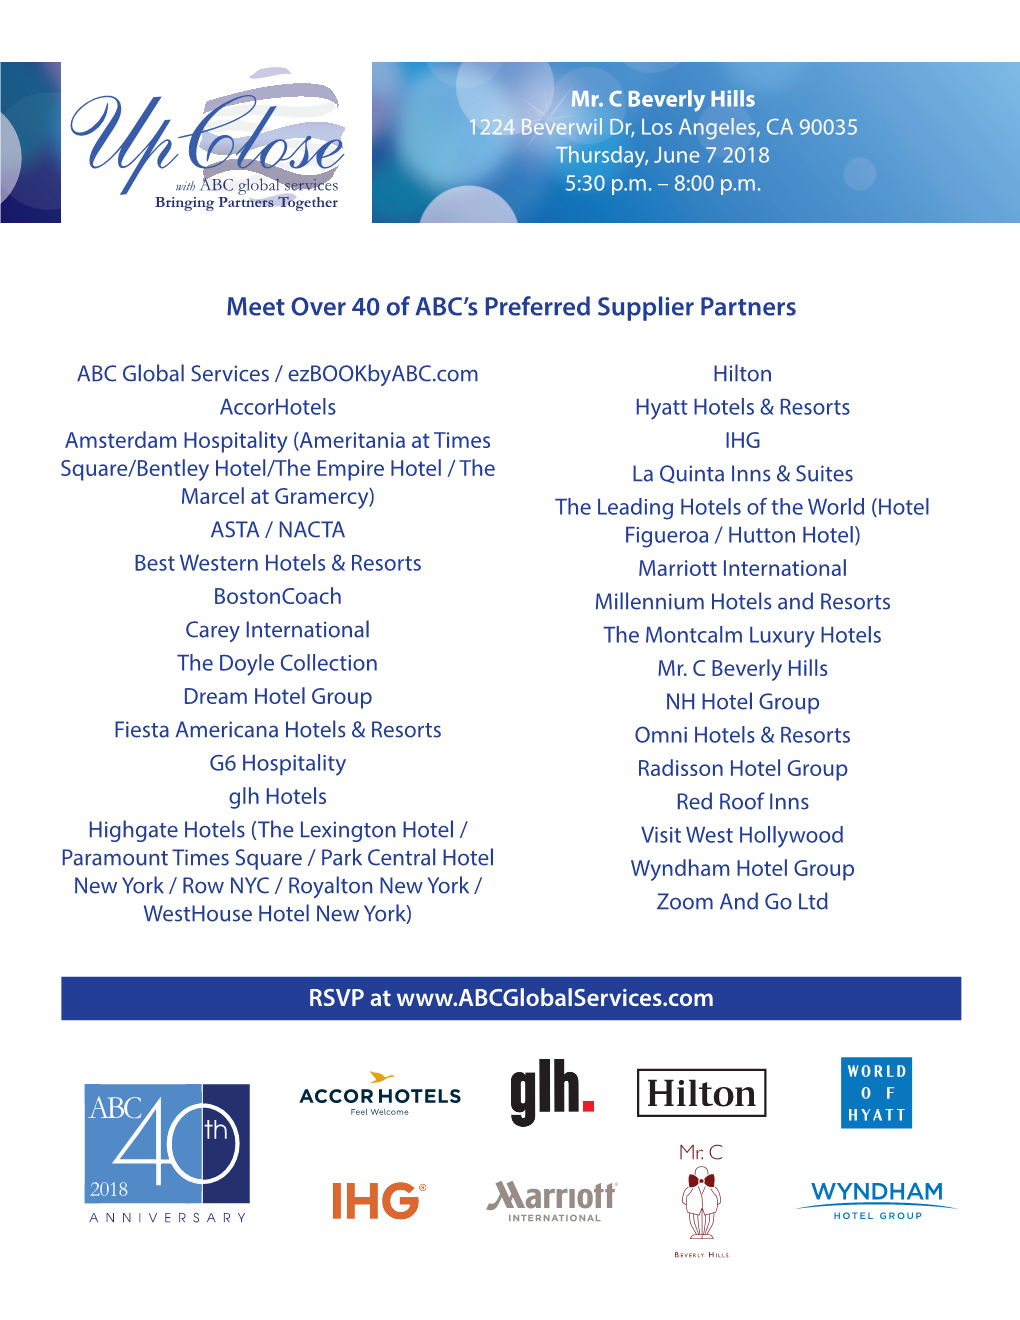 Meet Over 40 of ABC's Preferred Supplier Partners